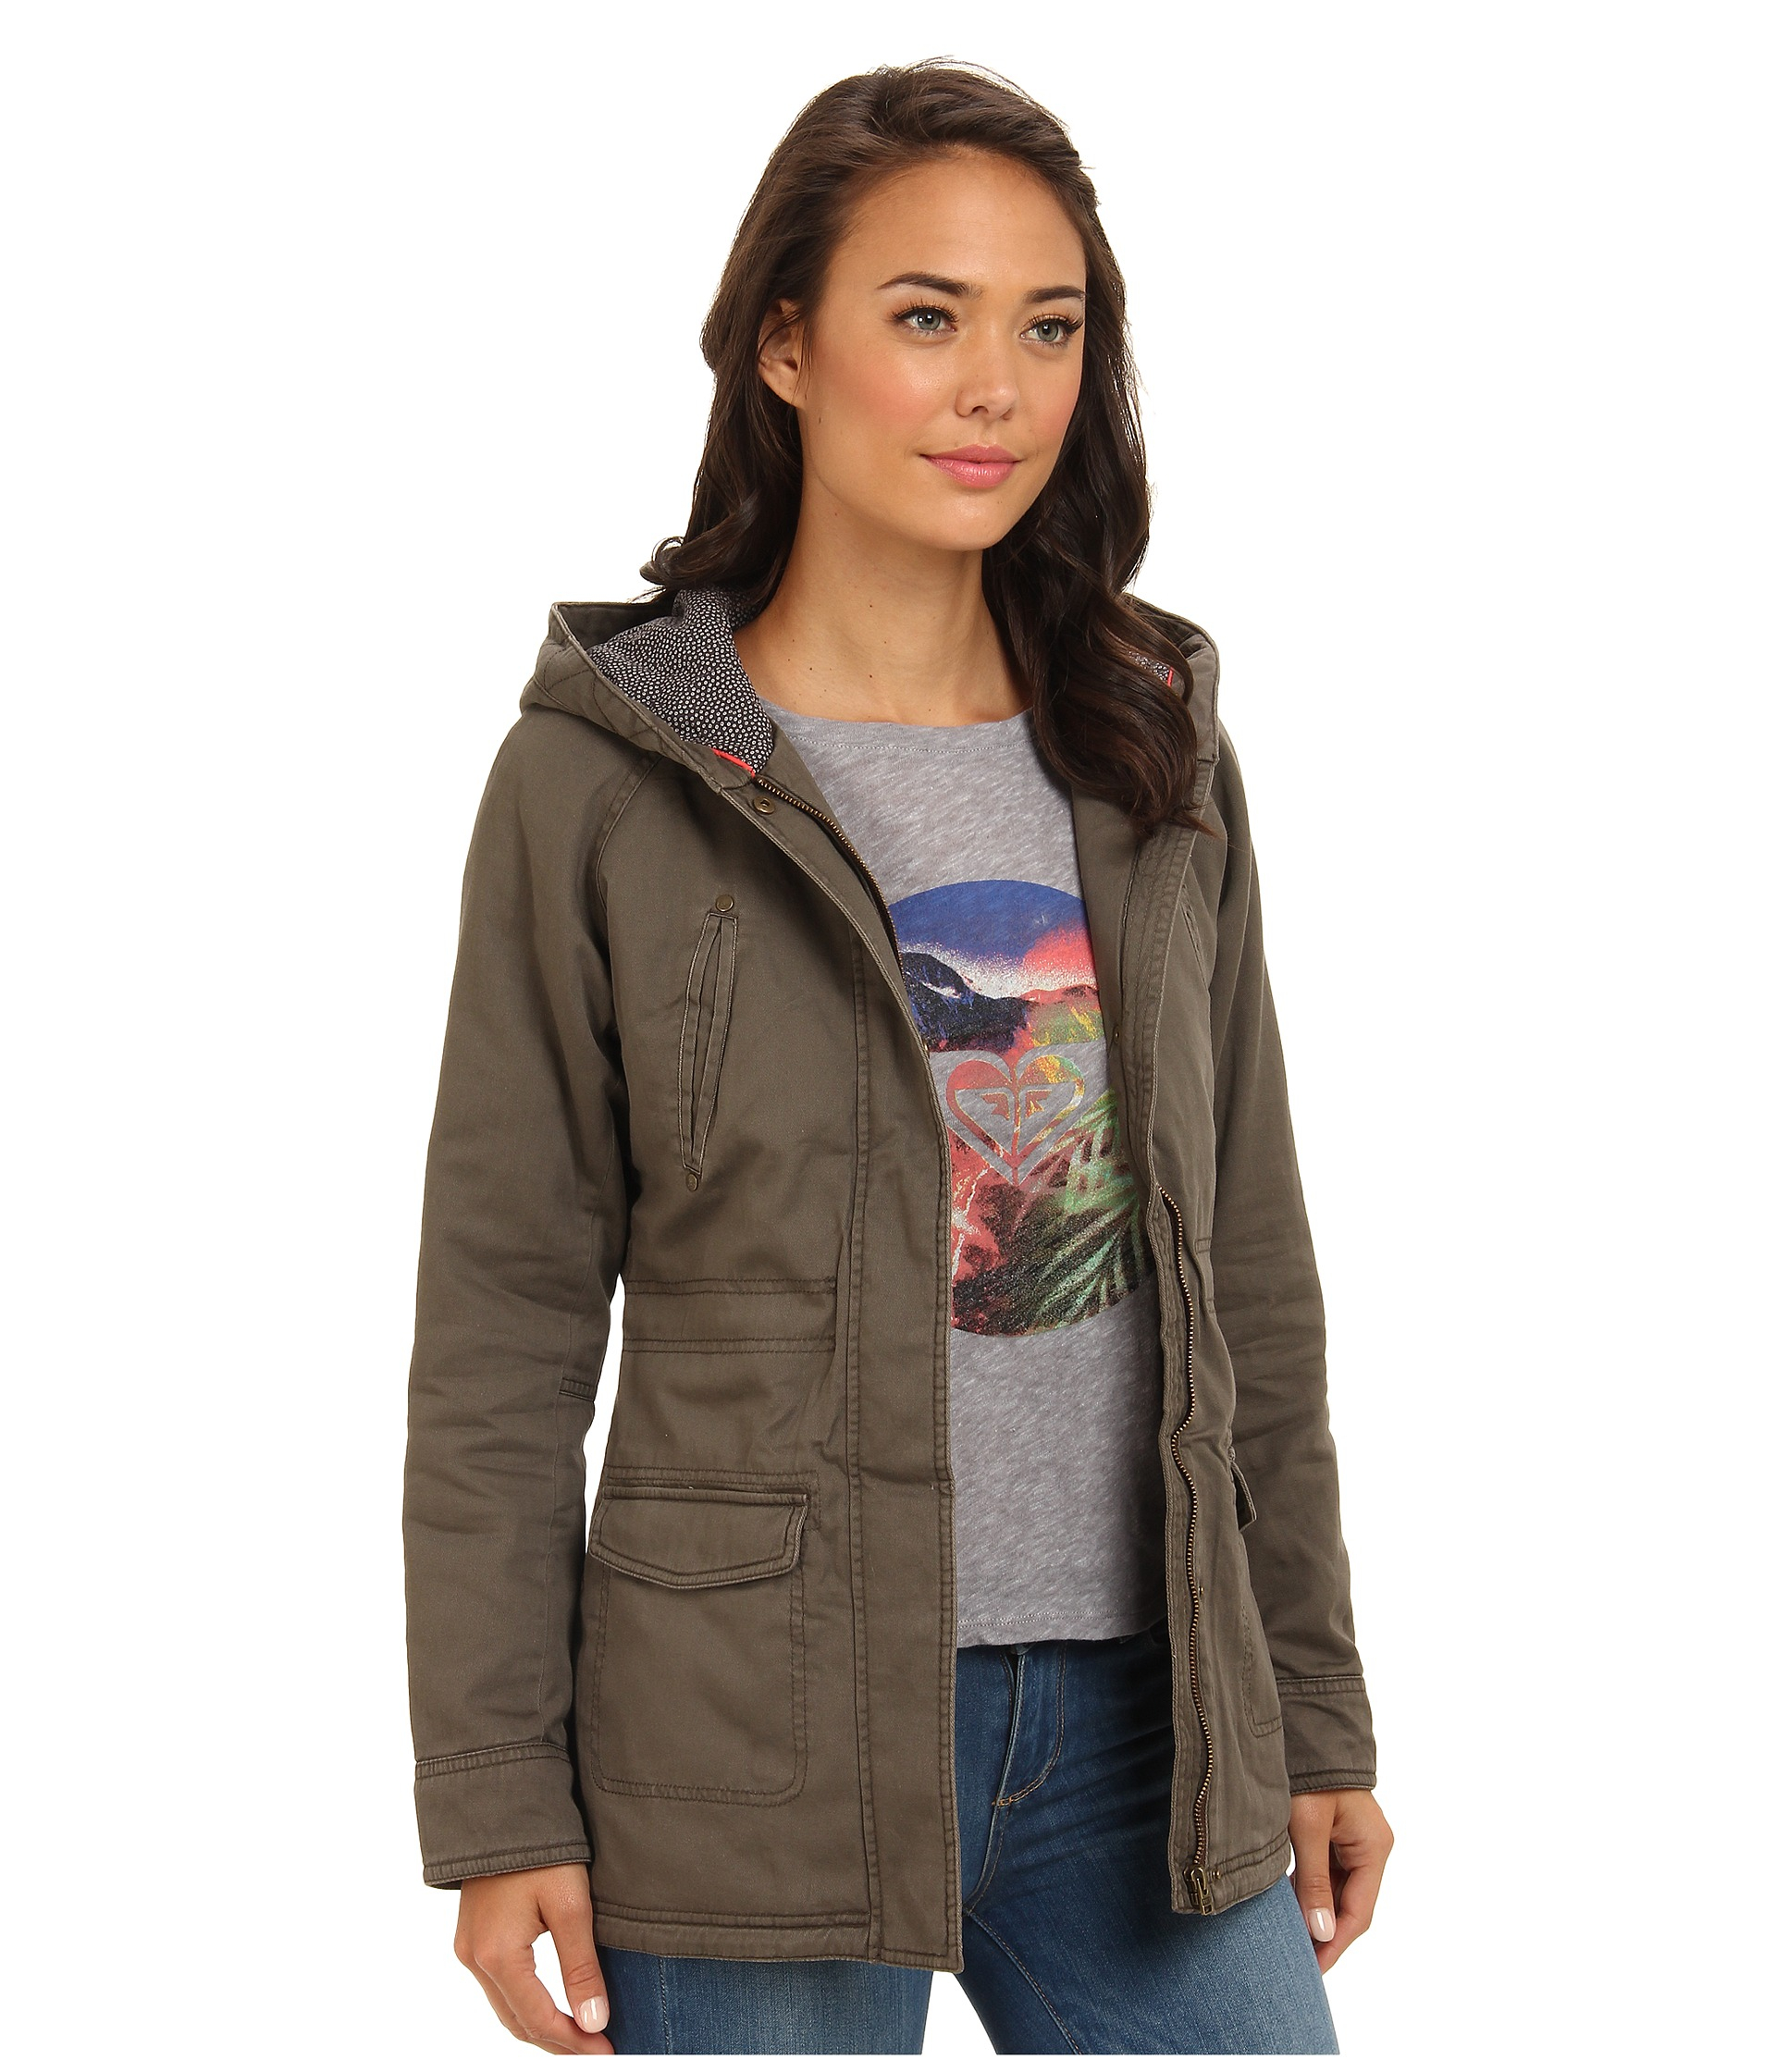 Lyst - Roxy Be There Parka Coat in Brown